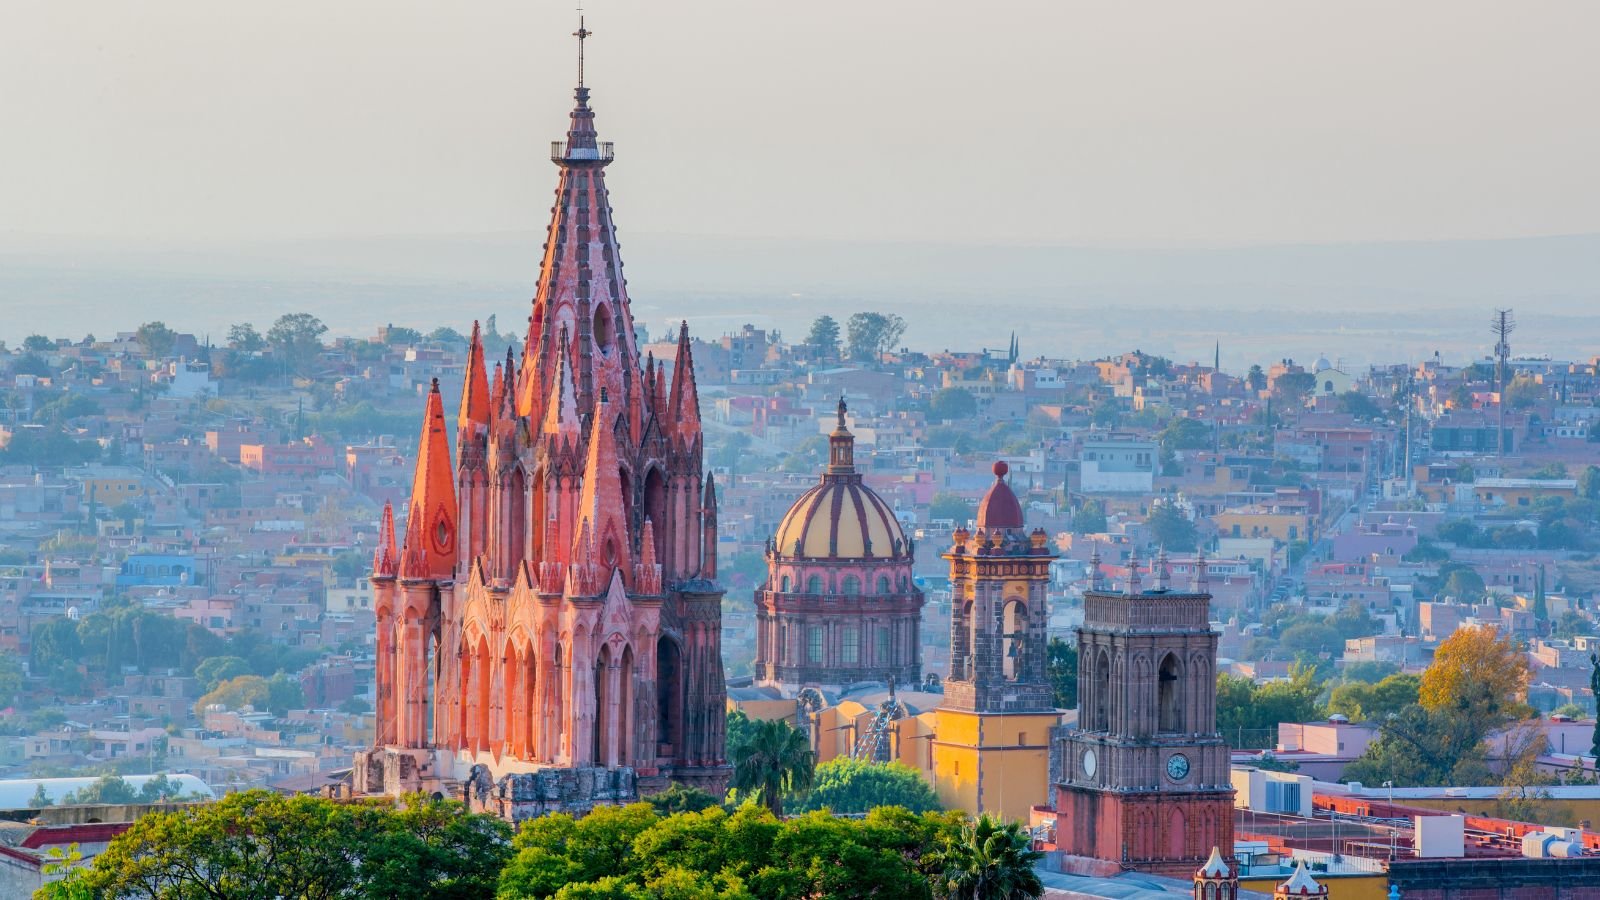 <p>San Miguel de Allende is a picturesque colonial town with a cost of living of <a href="https://casasanjosesma.com/blog/cost-of-living-in-san-miguel-de-allende" rel="noopener">less than $1,500</a>. It is home to <a href="https://mexicorelocationguide.com/living-and-retire-in-san-miguel-guide/" rel="noopener">about 10% of expats</a> among its total population. The city is known for its vibrant art and color architecture. It is a heaven for creatives and retirees alike. The high-desert climate offers warm days and cool nights year-round. While there is no local airport, you can access it via Leon which is 2 hours away, or Queretaro which is 1 hour away. The city’s bilingual atmosphere makes it easy for English speakers to integrate.</p>